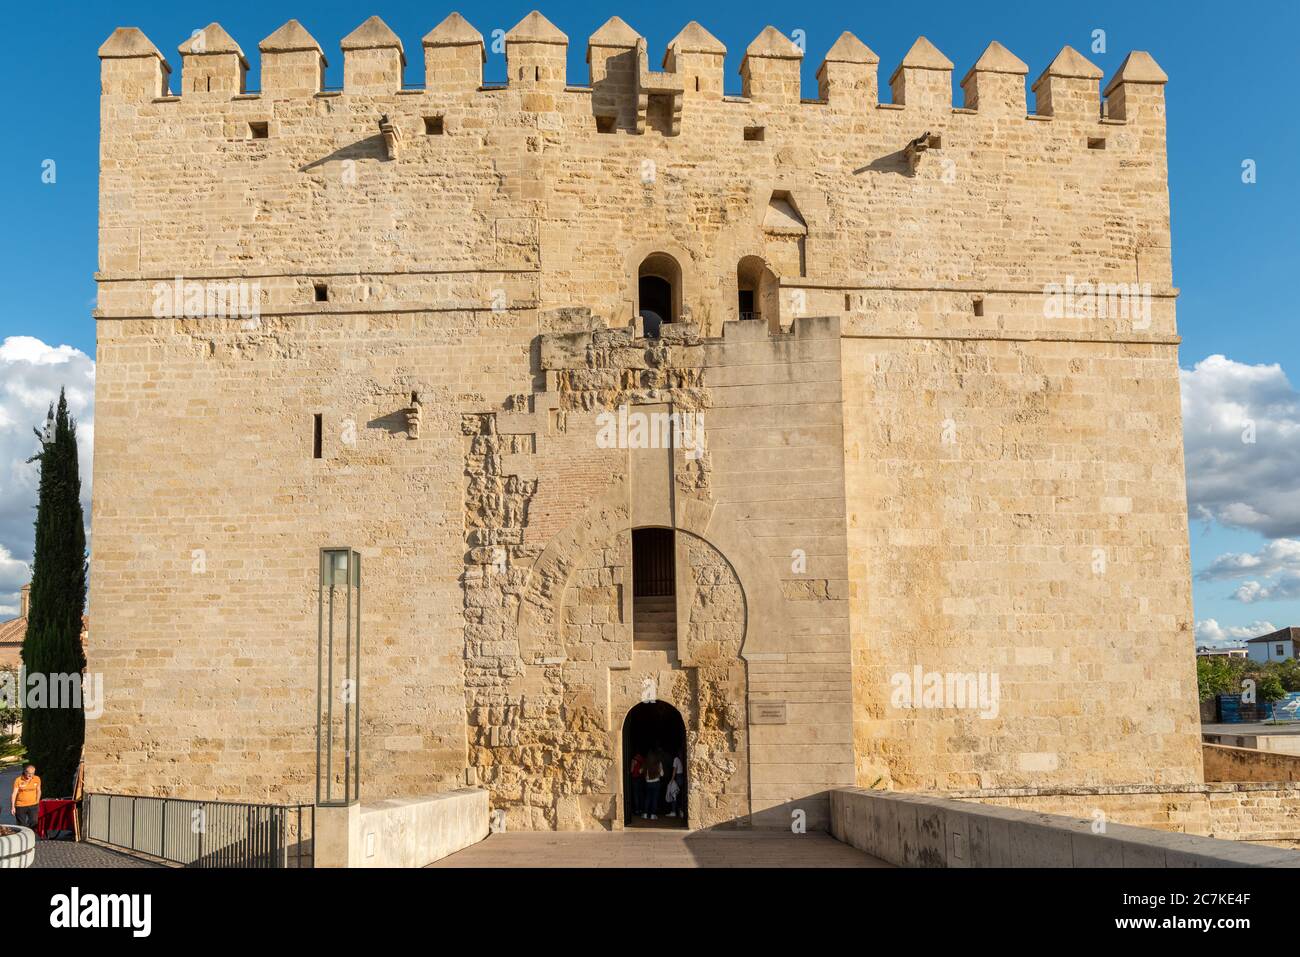 The historic Torre de la Calahorra in Cordoba was first erected by the Almohad Caliphate to protect the nearby Roman Bridge on the Guadalquivir river. Stock Photo